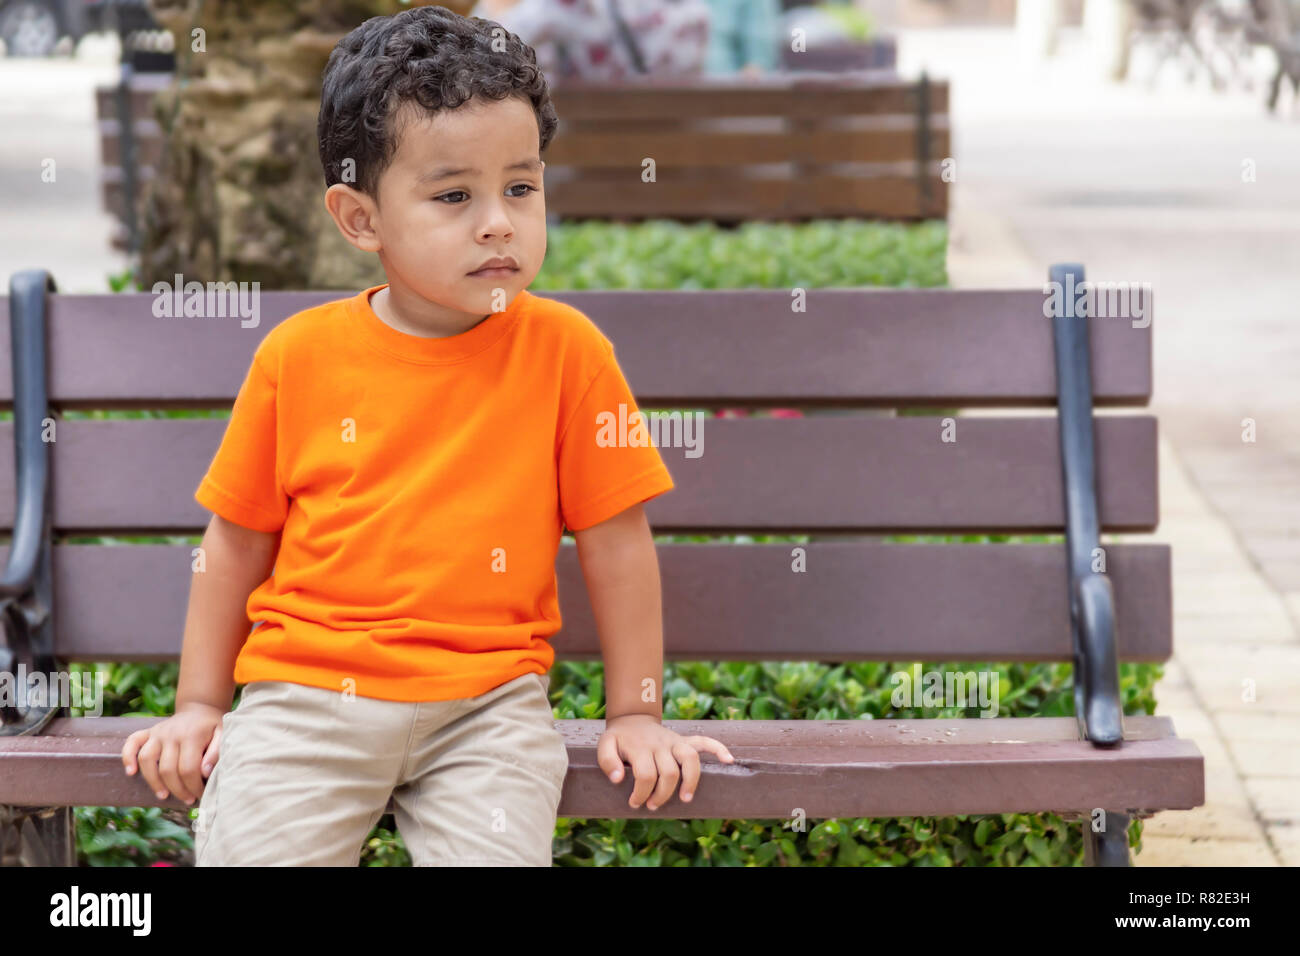 A concerned little boy sits on the public bench. The young boy in the orange shirt sits calmly on the park bench. Stock Photo